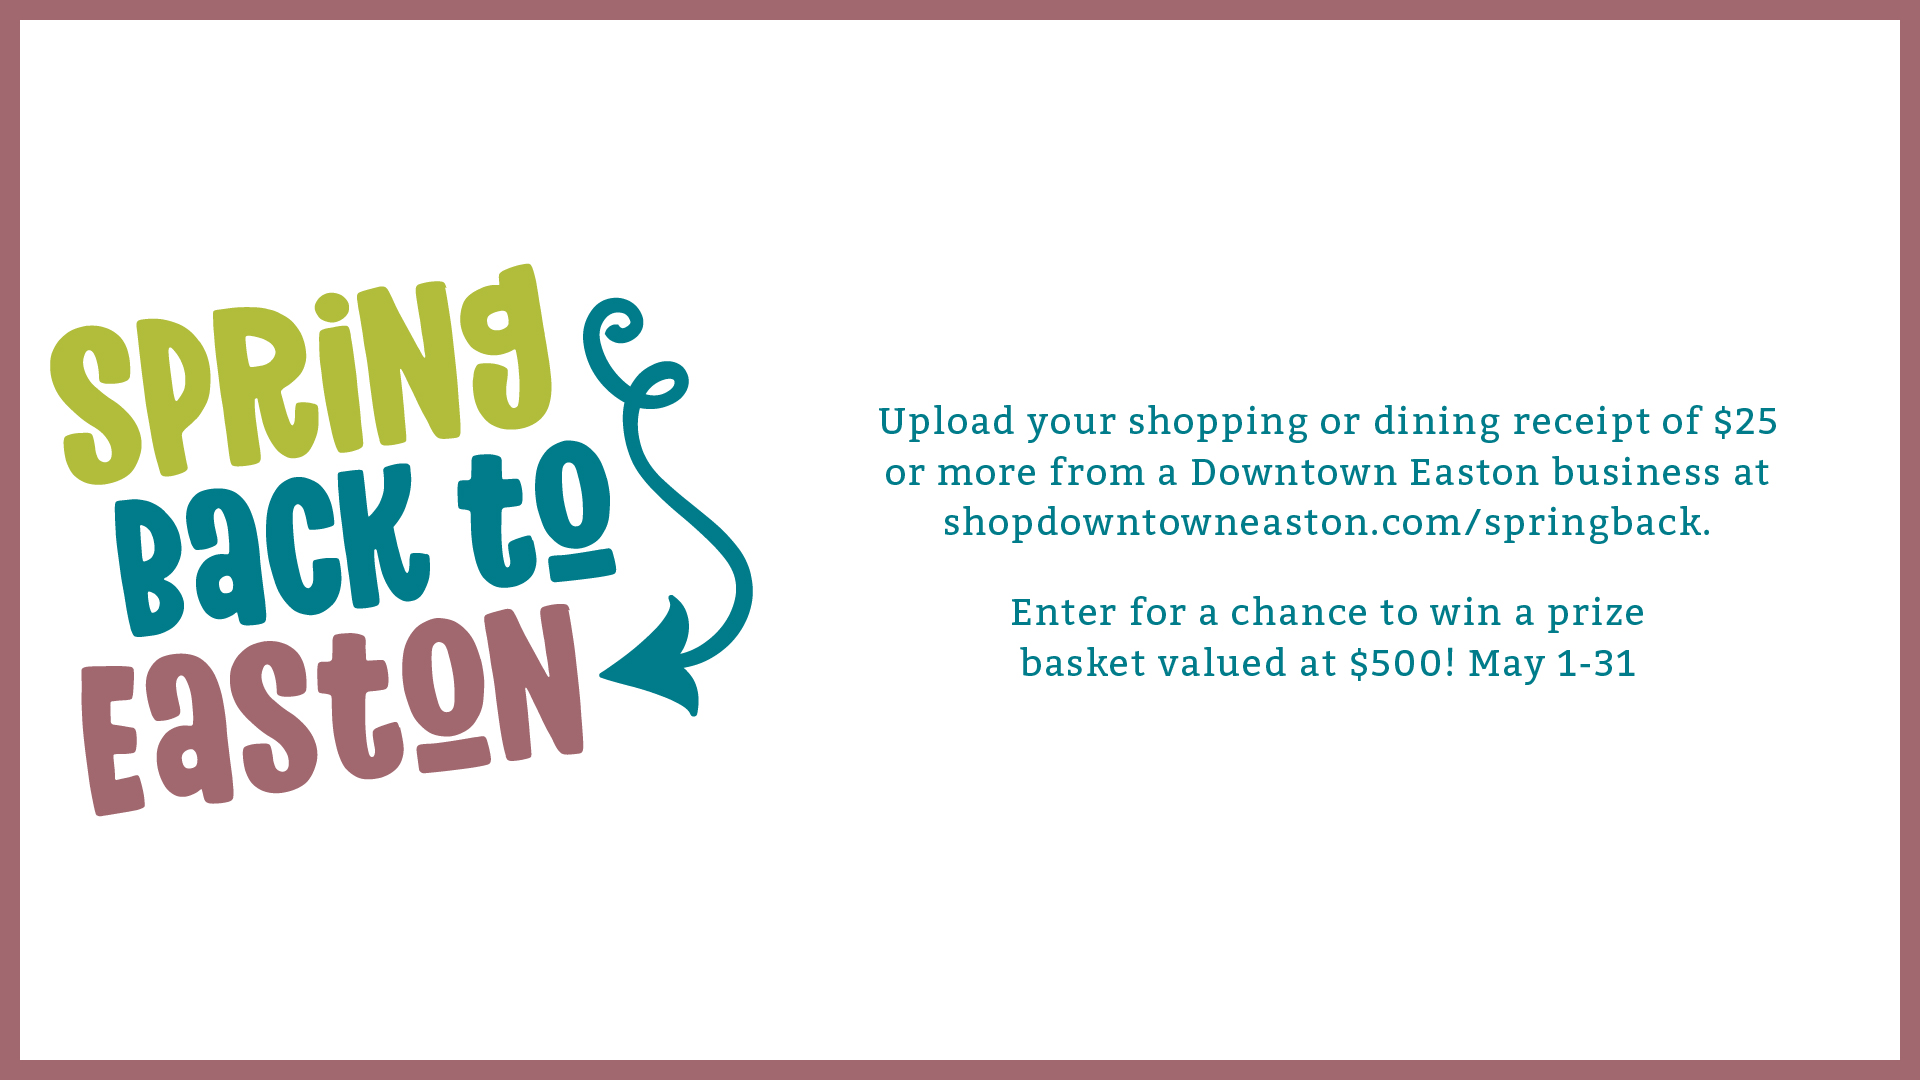 Spring Back to Easton Shopping Campaign Rewards Those Who Shop Local